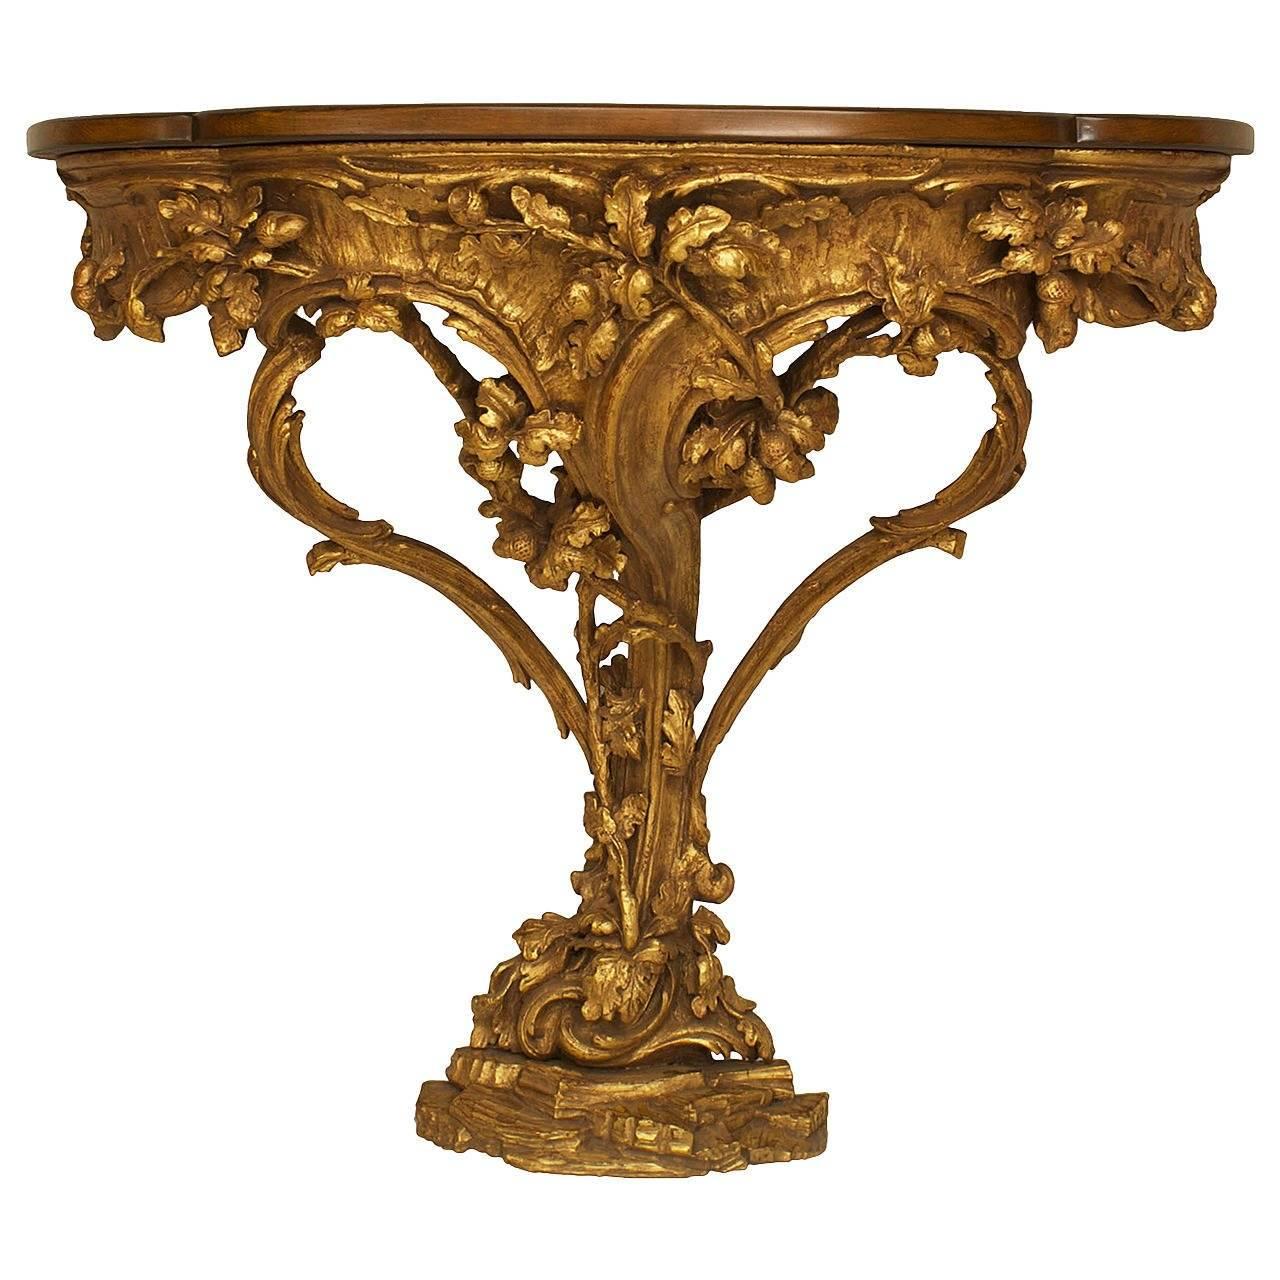 Italian Rococo (circa 1770) gilt wood console table with a floral filigree design and shaped top.
